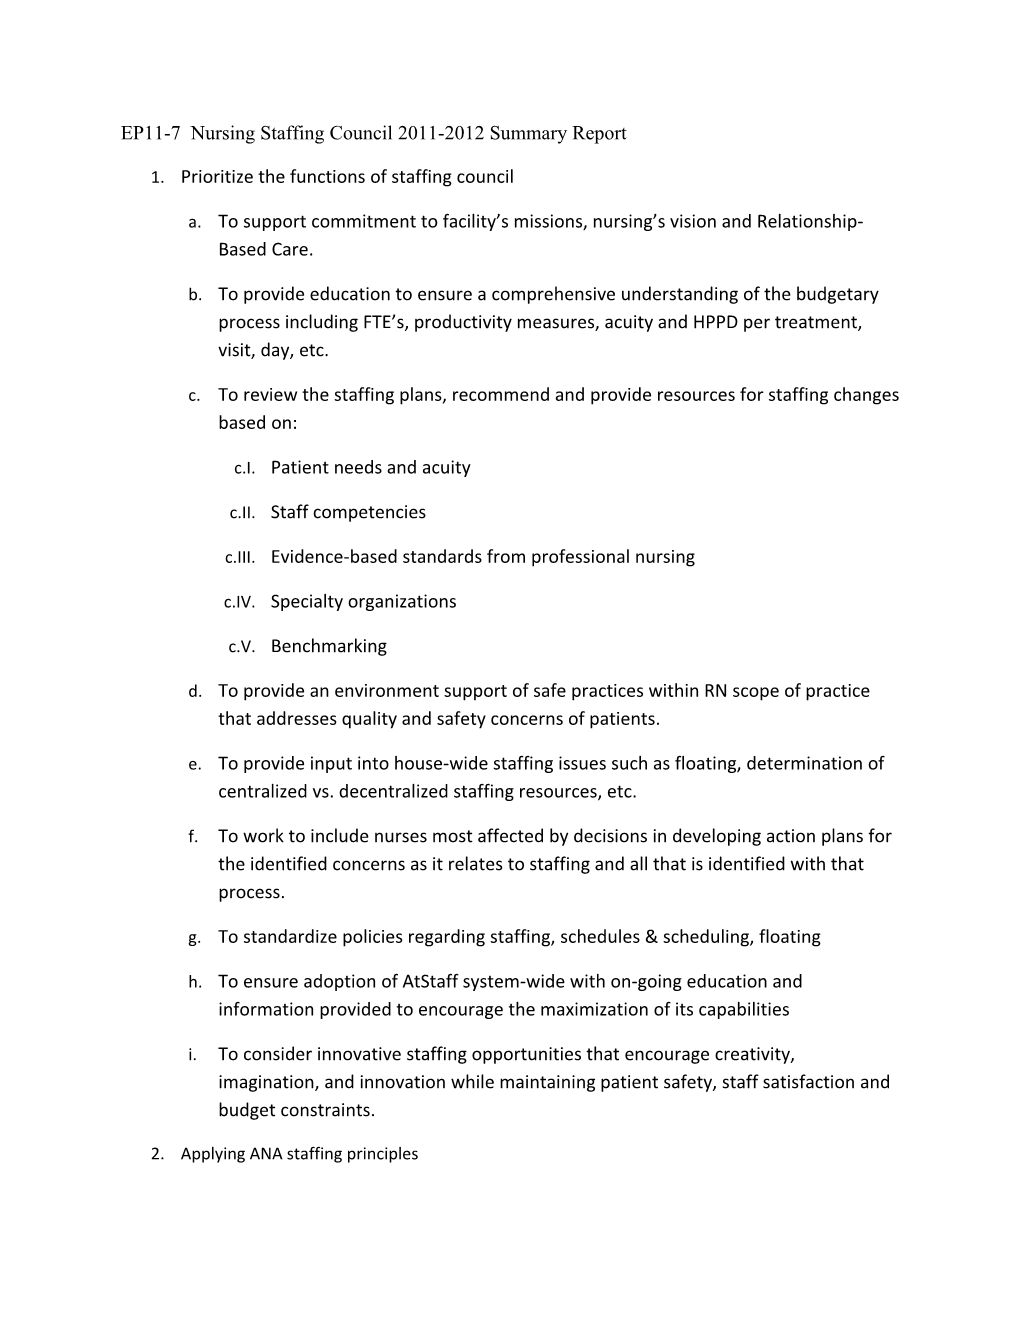 EP11-7 Nursing Staffing Council 2011-2012 Summary Report